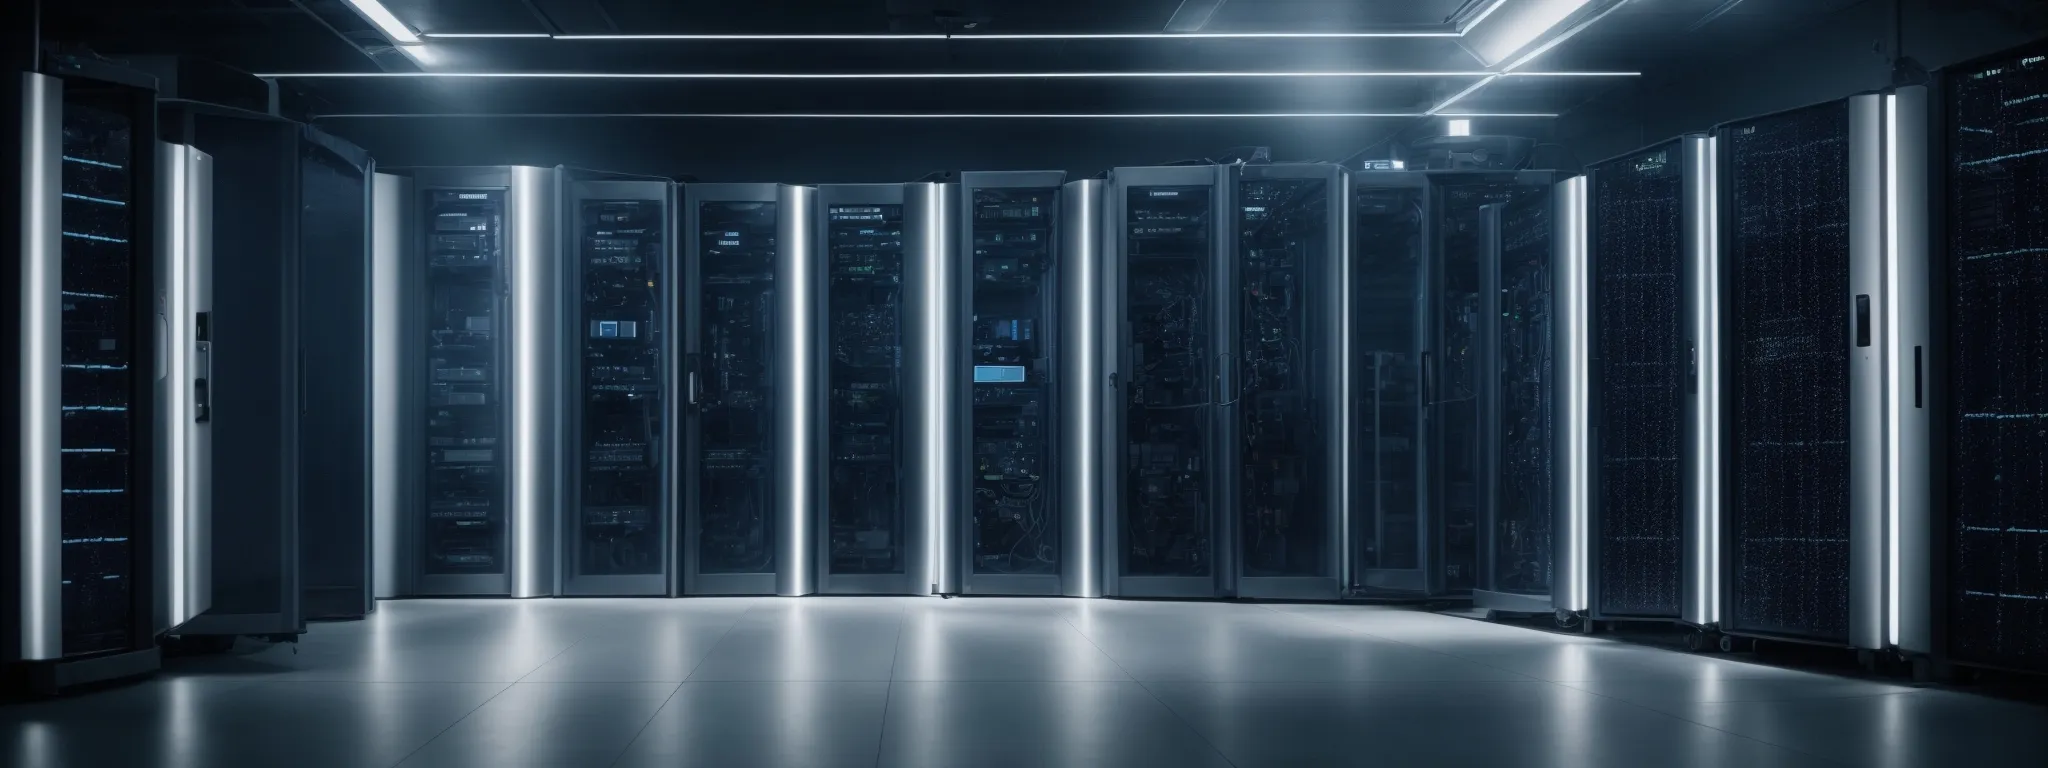 a secure, shielded data center room with servers and a glowing padlock symbol projecting cybersecurity.